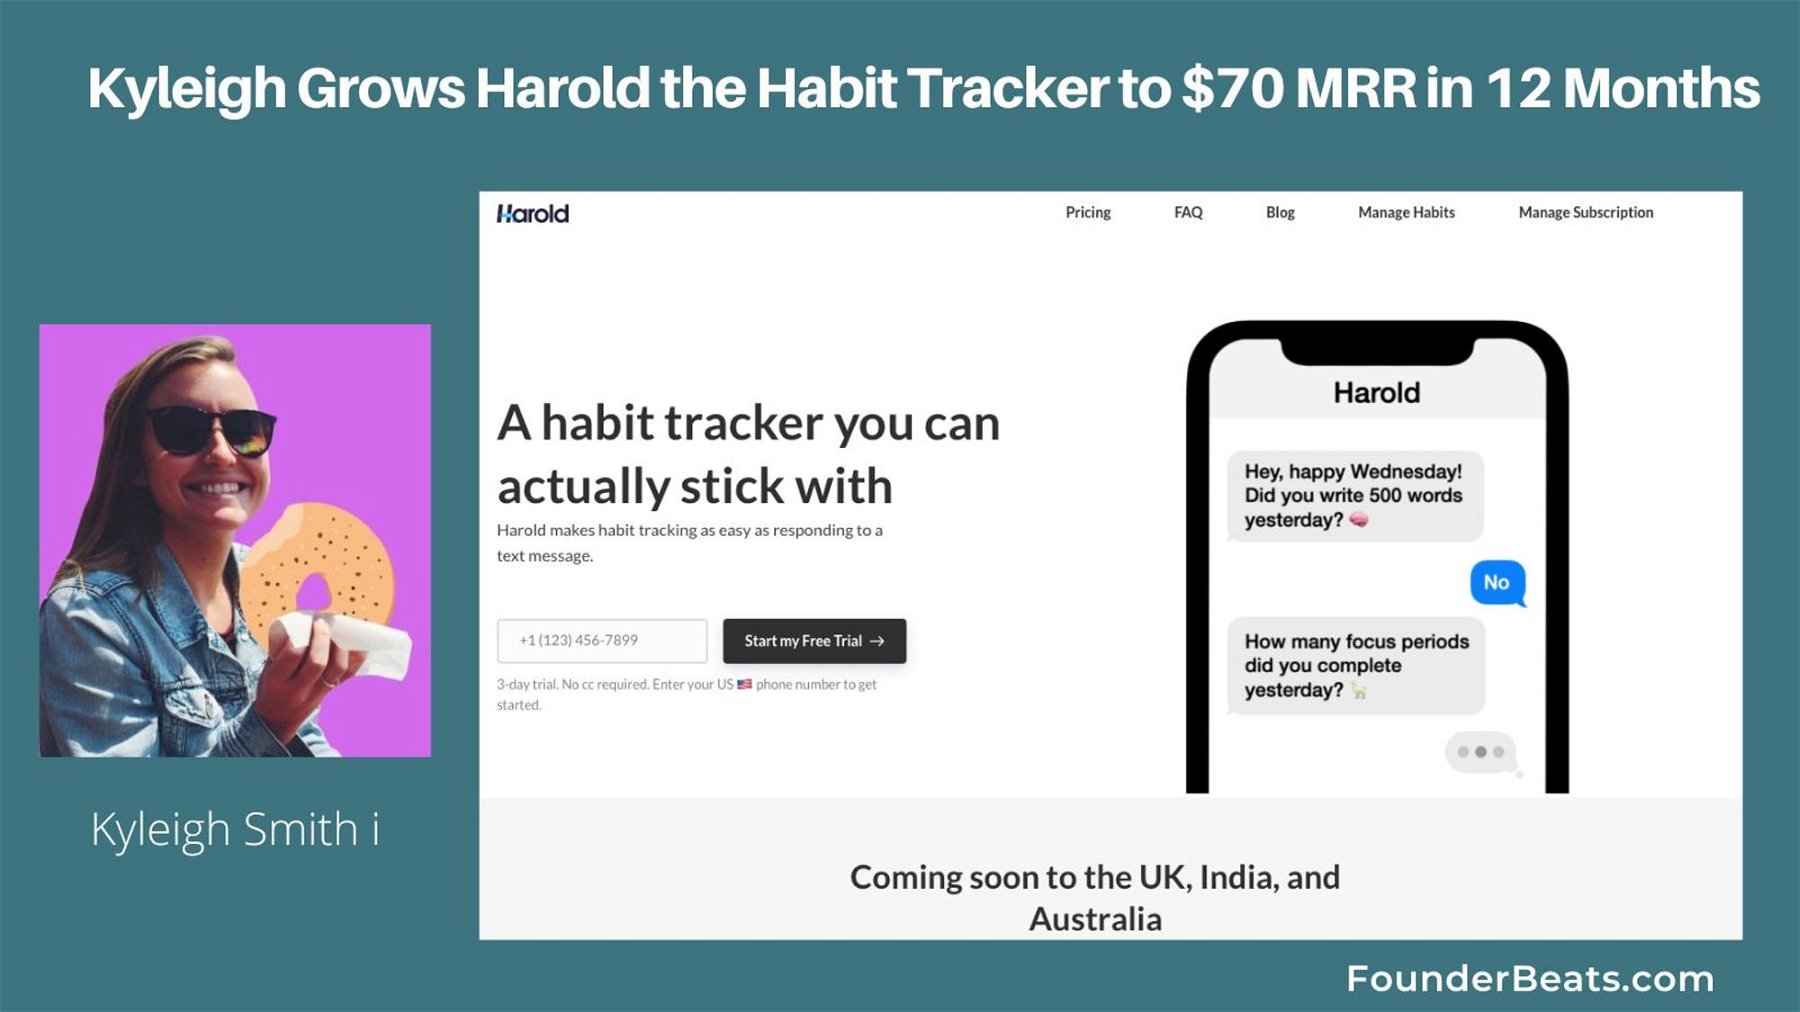 Kyleigh Grows Harold the Habit Tracker to $70 MRR in 12 Months